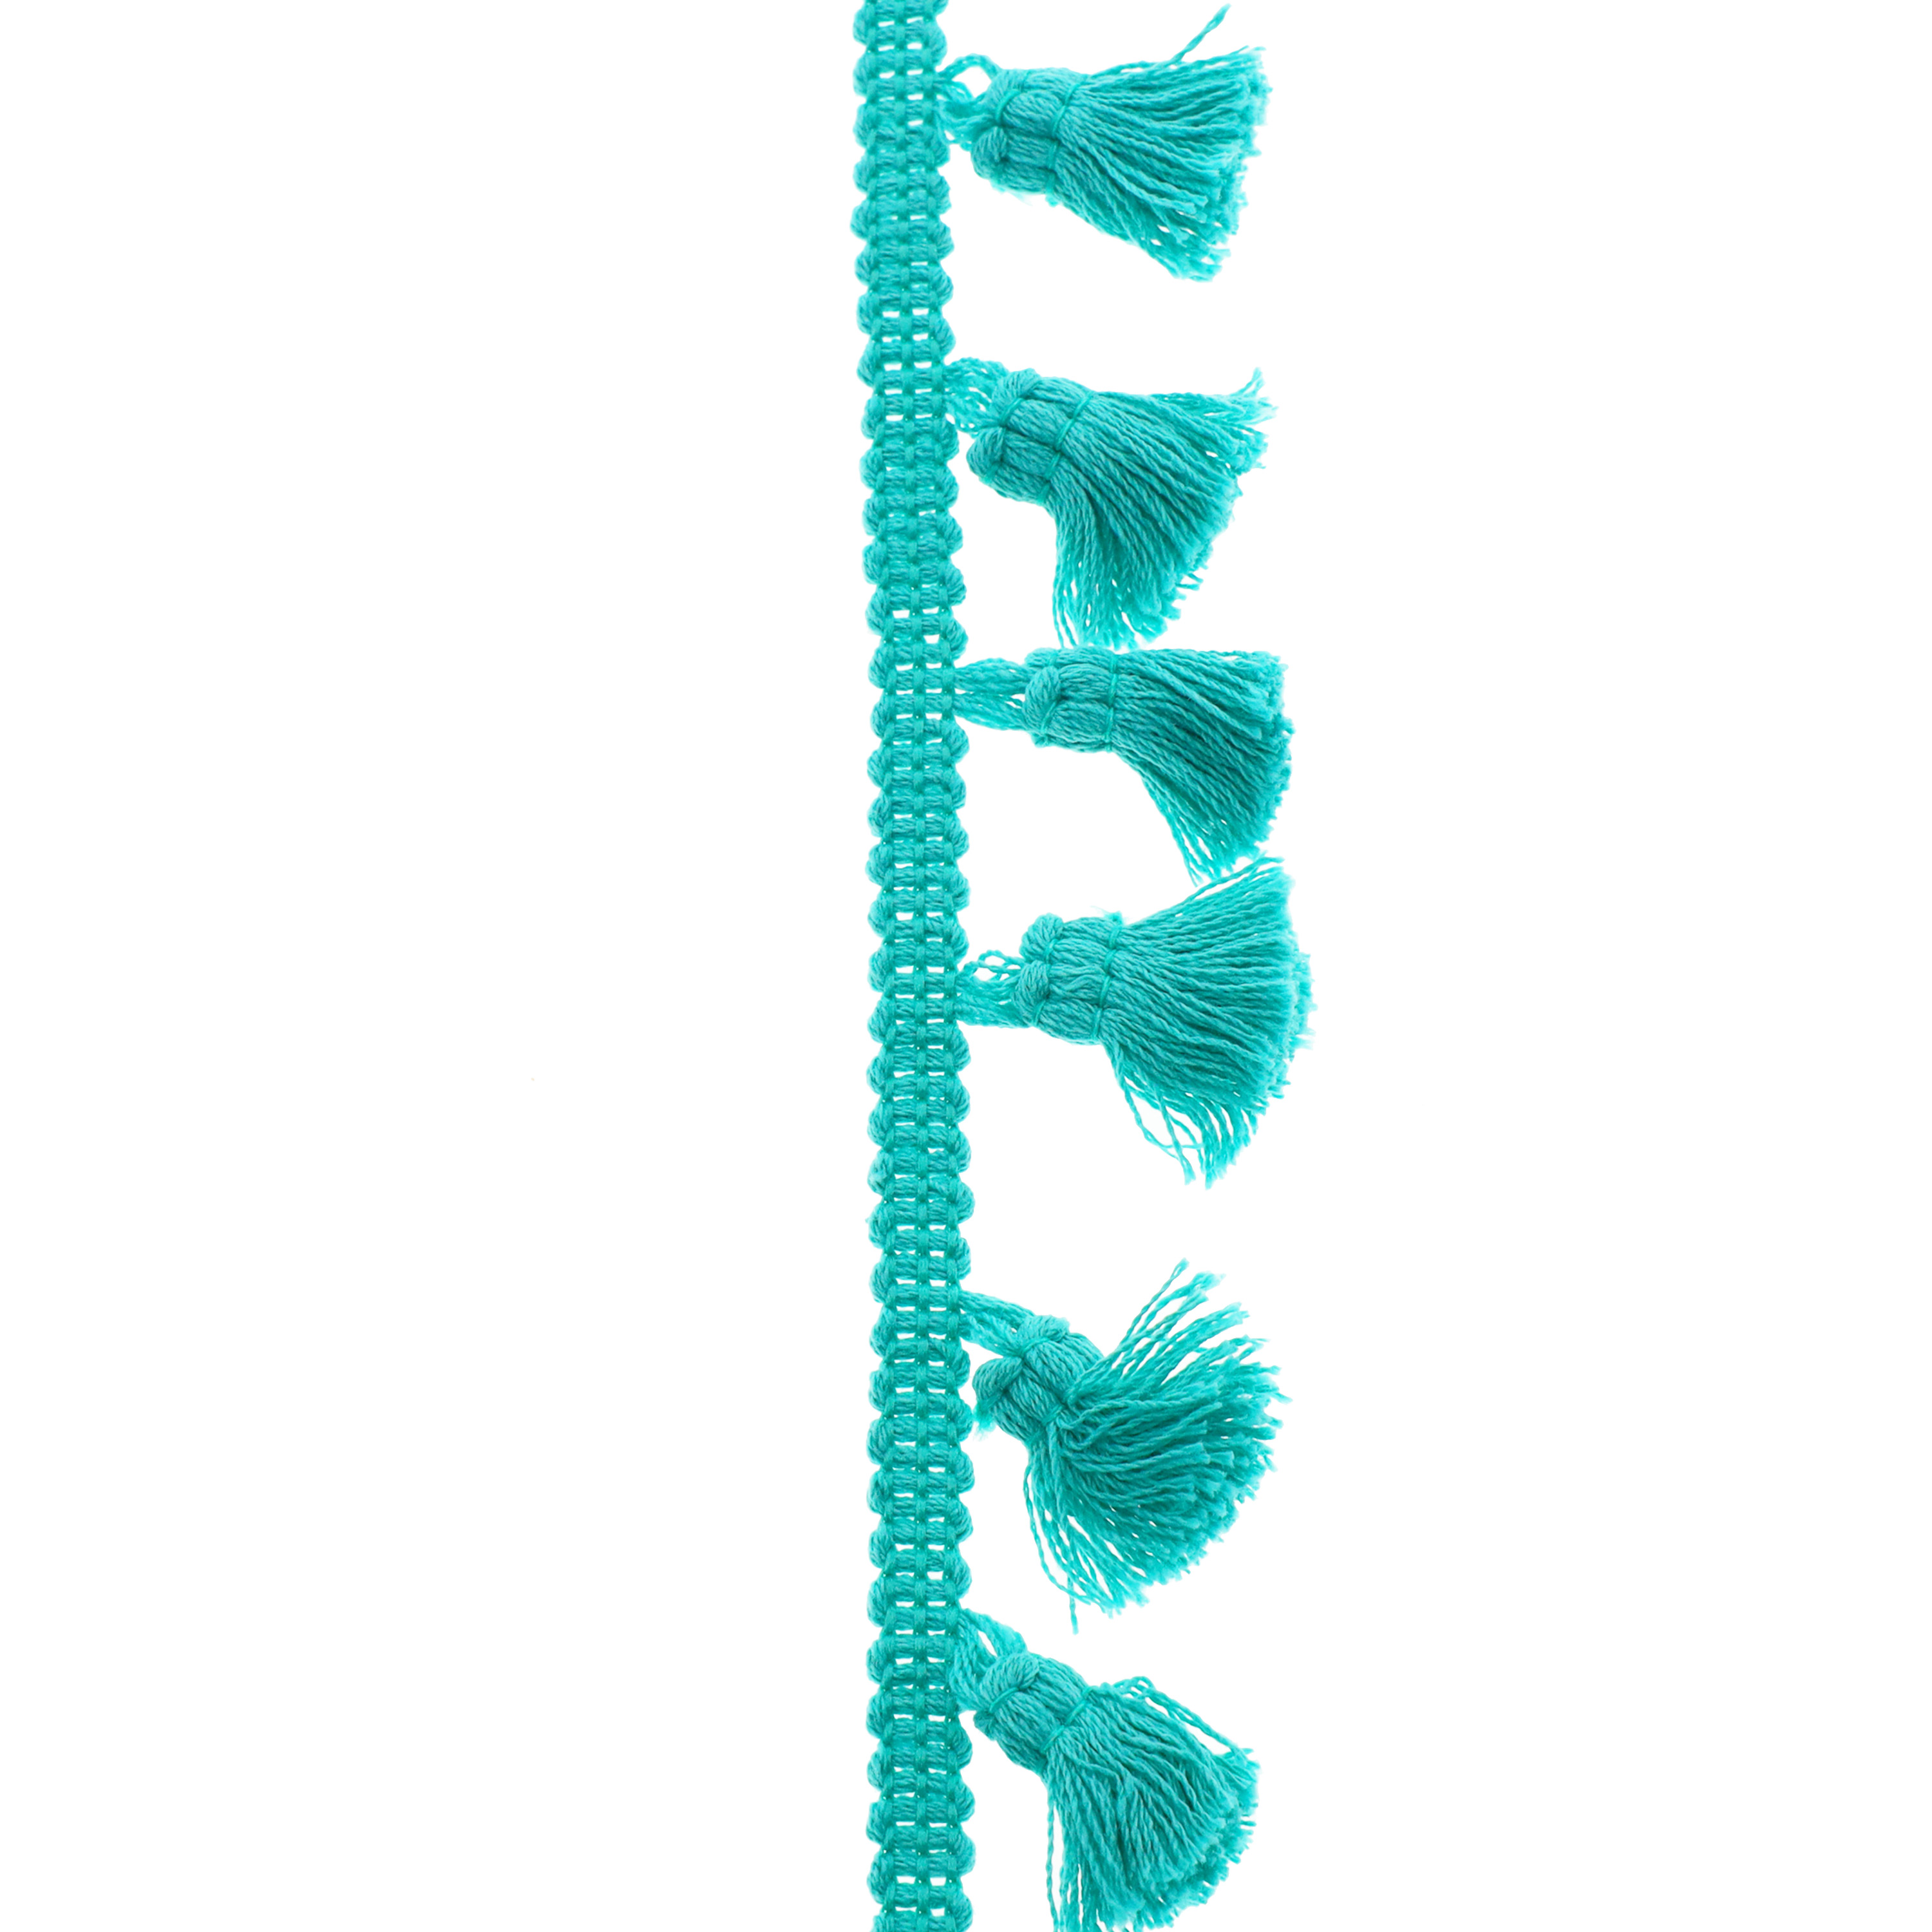 Simplicity Trim, Teal 1 1/4 inch Mini Tassel Fringe Trim Great for Apparel,  Home Decorating, and Crafts, 2 Yards, 1 Each